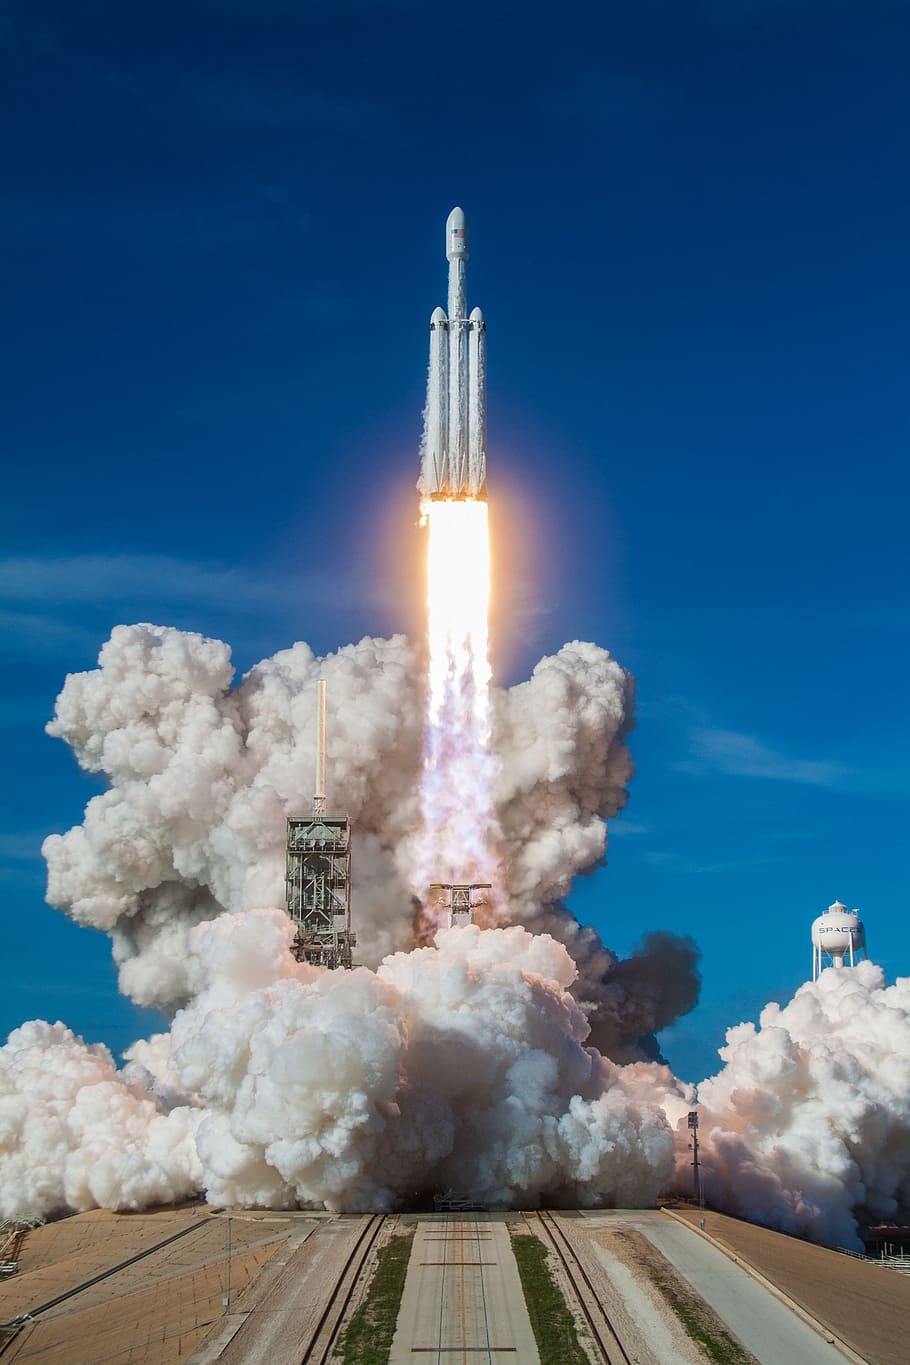 Falcon Heavy, Demo, Mission, rocket launch, smoke - physical structure, rocket, space exploration, taking off, space travel vehicle, burning